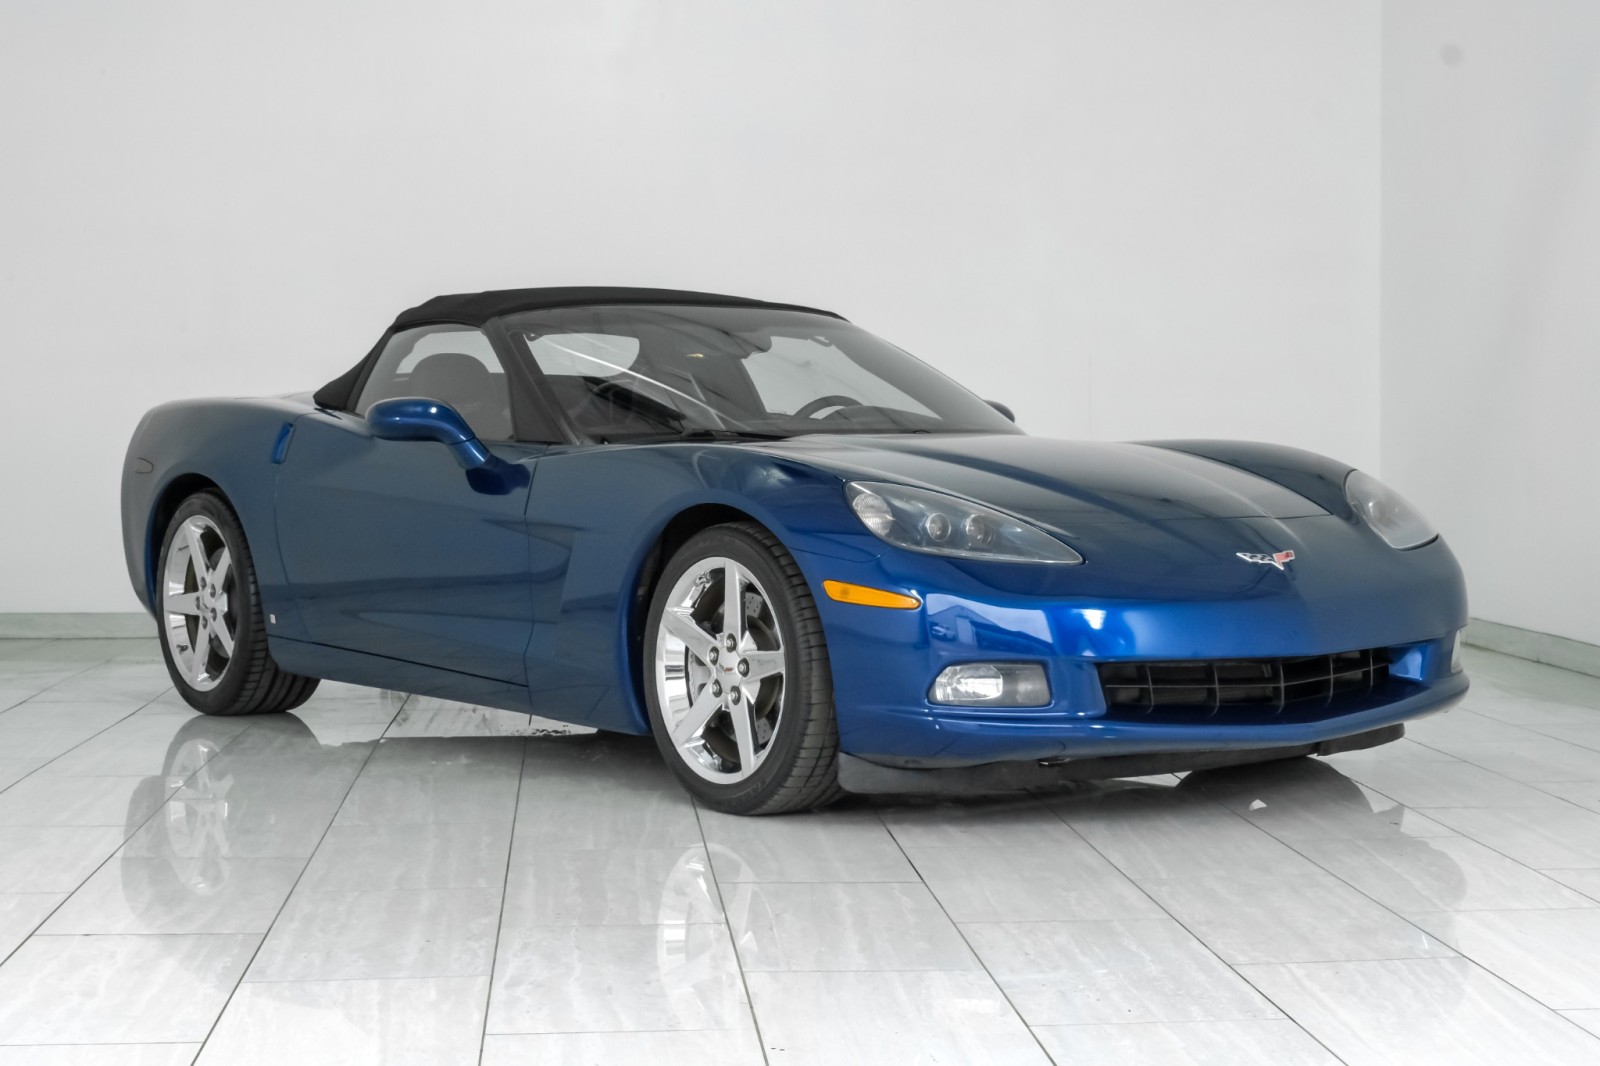 2007 Chevrolet Corvette Convertible AUTOMATIC NAVIGATION HEADUP DISPLAY LEATHER HEATED 3